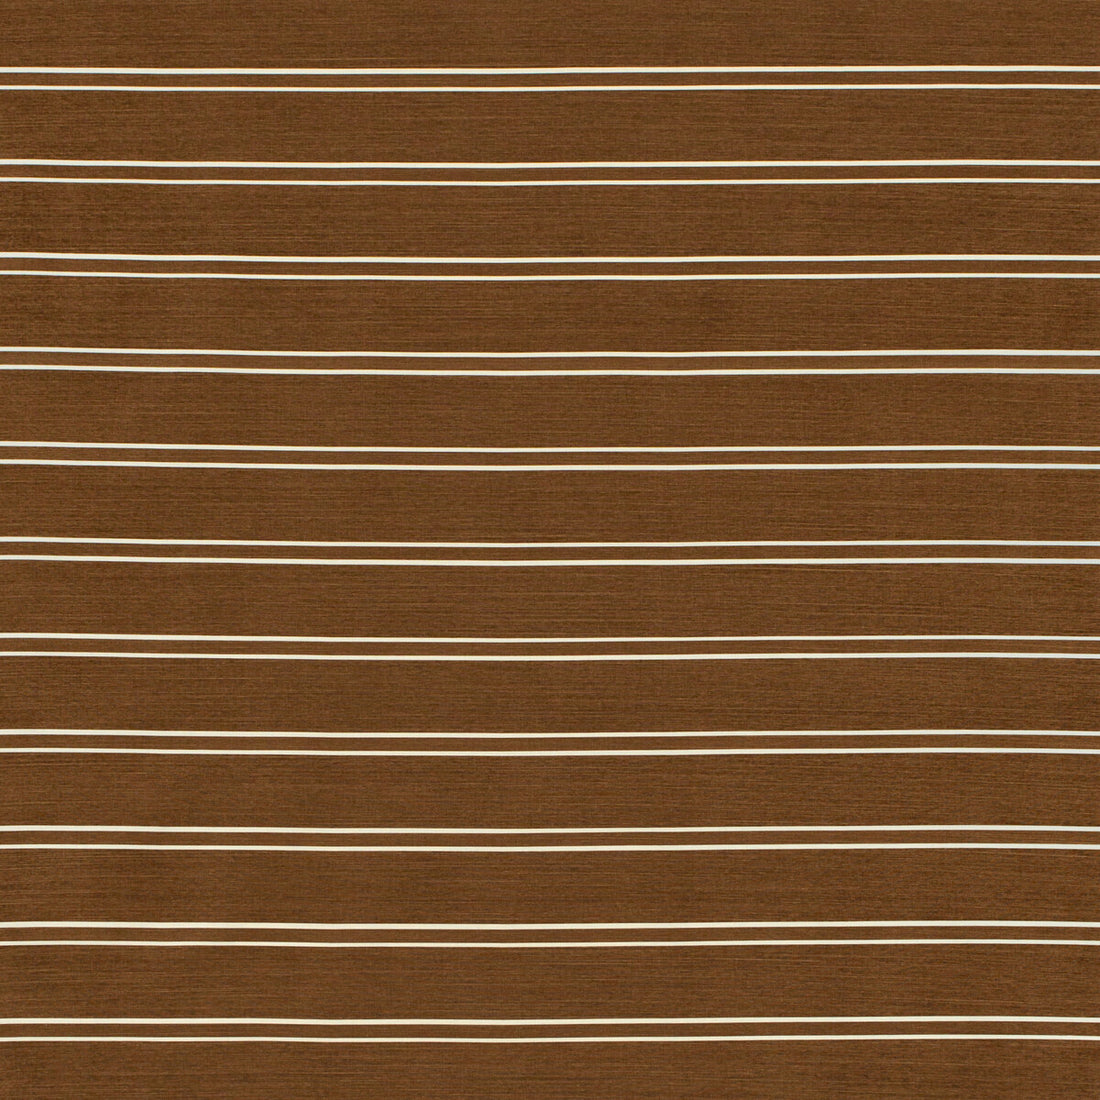 Horizon Stripe fabric in brown color - pattern 2024105.6.0 - by Lee Jofa in the Paolo Moschino 2024 collection